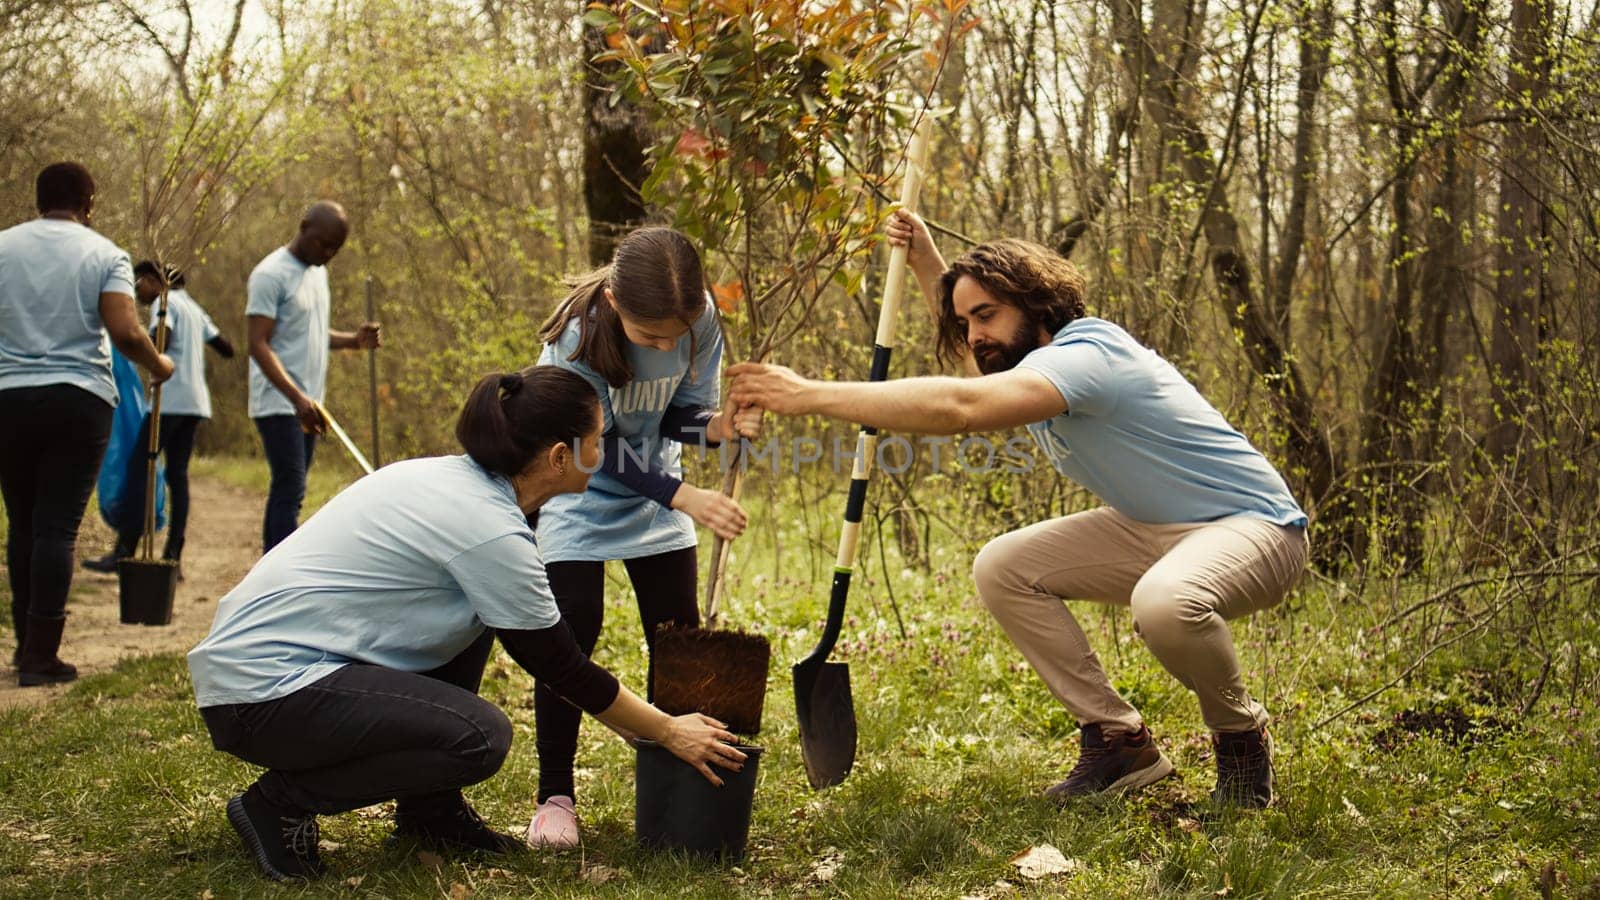 Team of volunteers planting trees around forest area for nature preservation by DCStudio